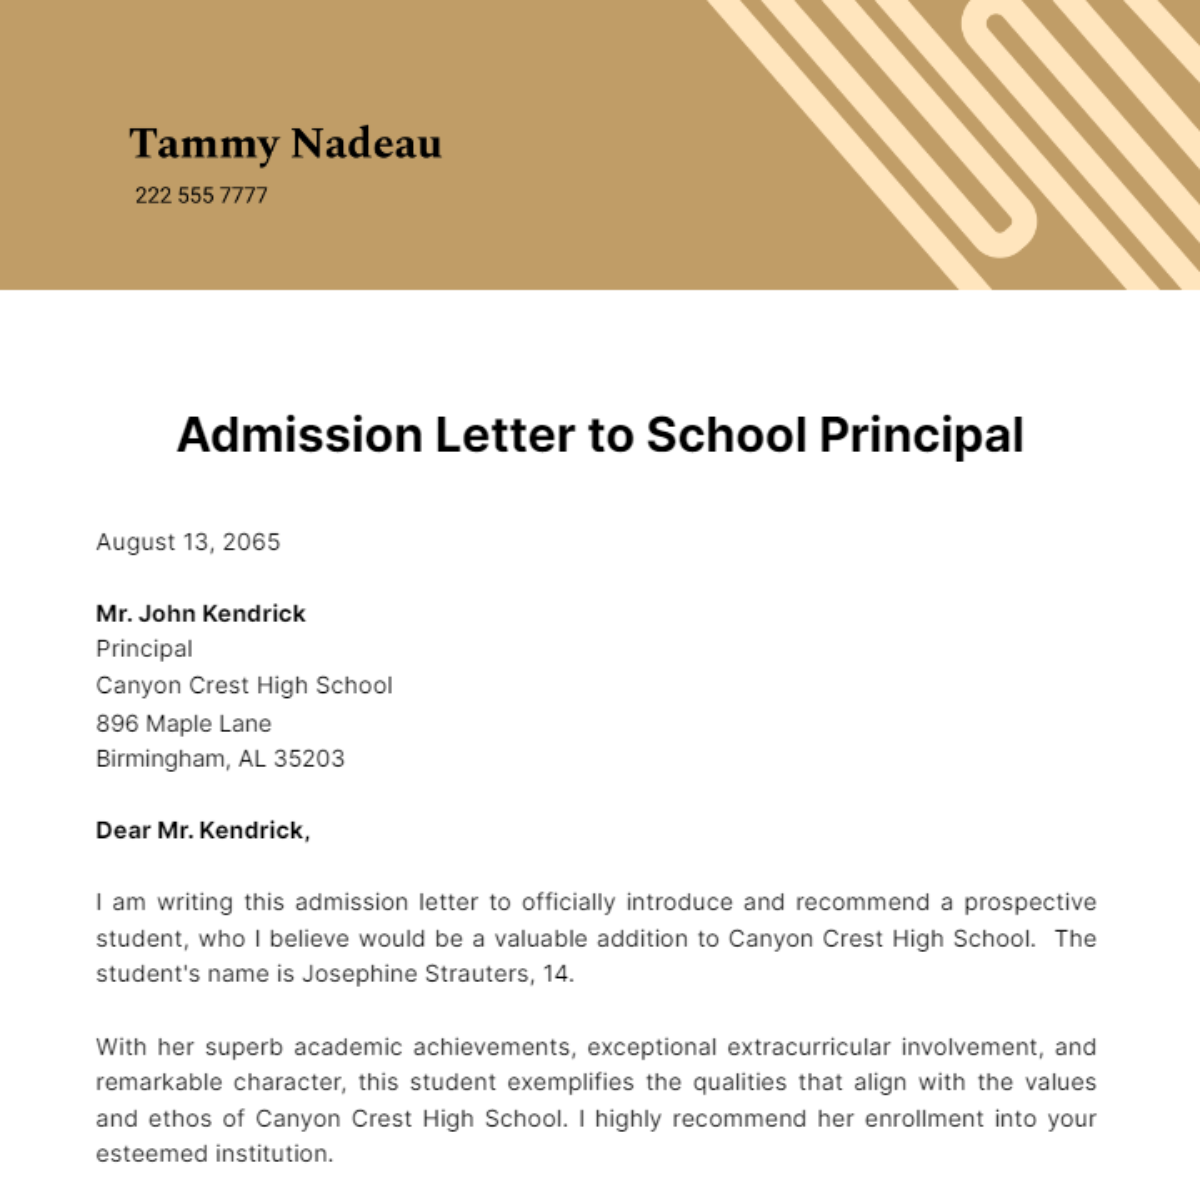 Admission Letter to School Principal Template